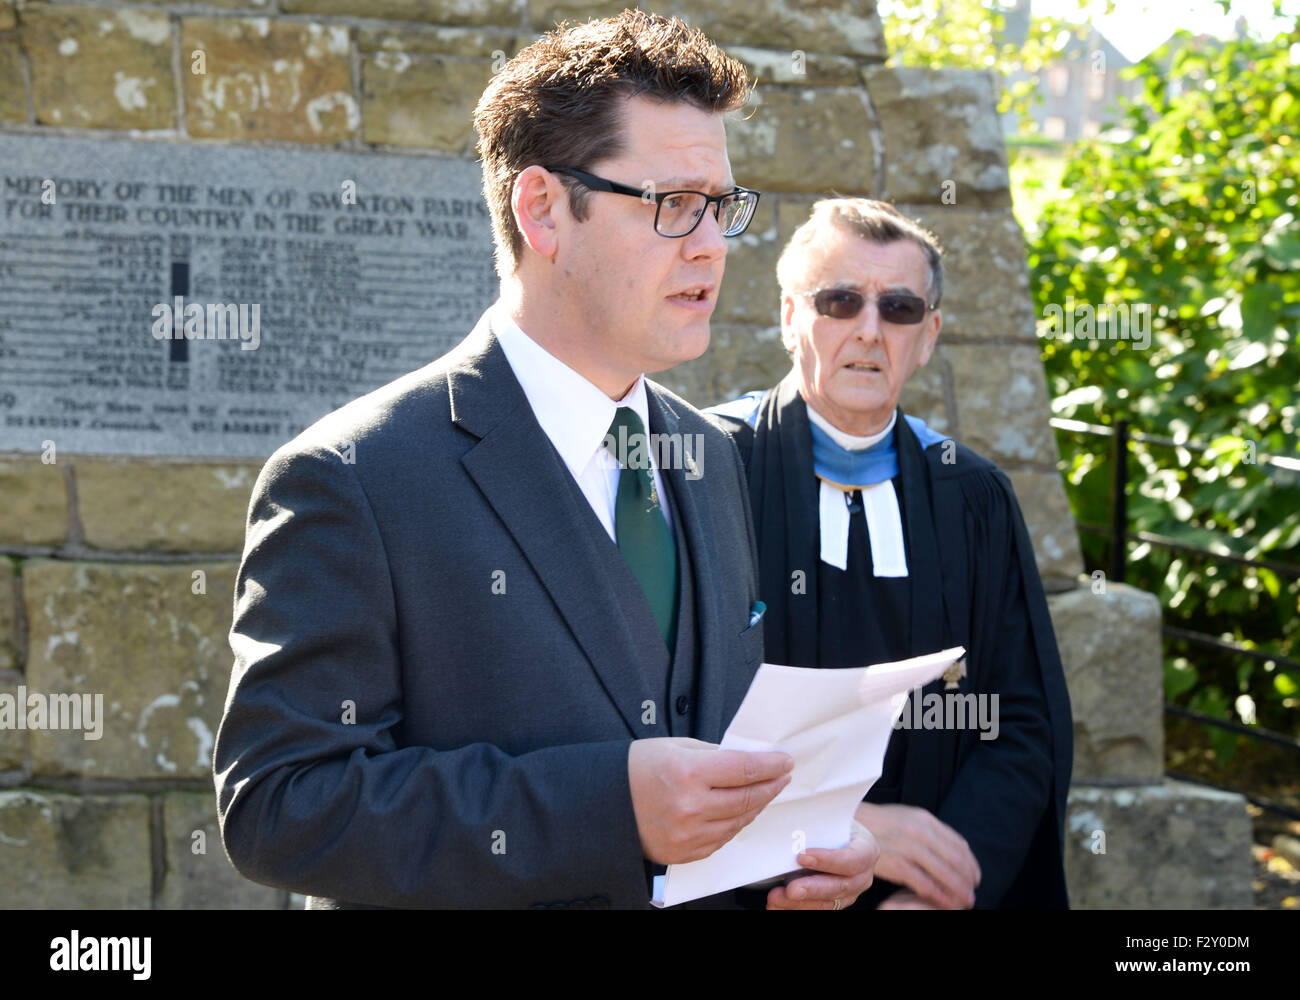 Swinton, UK. 25th Sep, 2015. Kevin Laidlaw, Great Grandson of Piper Laidlaw.  The Laying of the Commerative VC Stone in the small Scottish Border village of Swinton to mark the 100th Anniversary of the award of the Victoria Cross to Piper Daniel Laidlaw for his actions whilst serving with the 7th Battalion of the King's Own Scottish Borderers.   Daniel Logan Laidlaw was born at Little Swinton, Berwickshire on 26 July 1875 and joined the Army in 1896. He served with the Durham Light Infantry in India where he received a certificate for his work during a plague outbreak in Bombay in 1898. Stock Photo